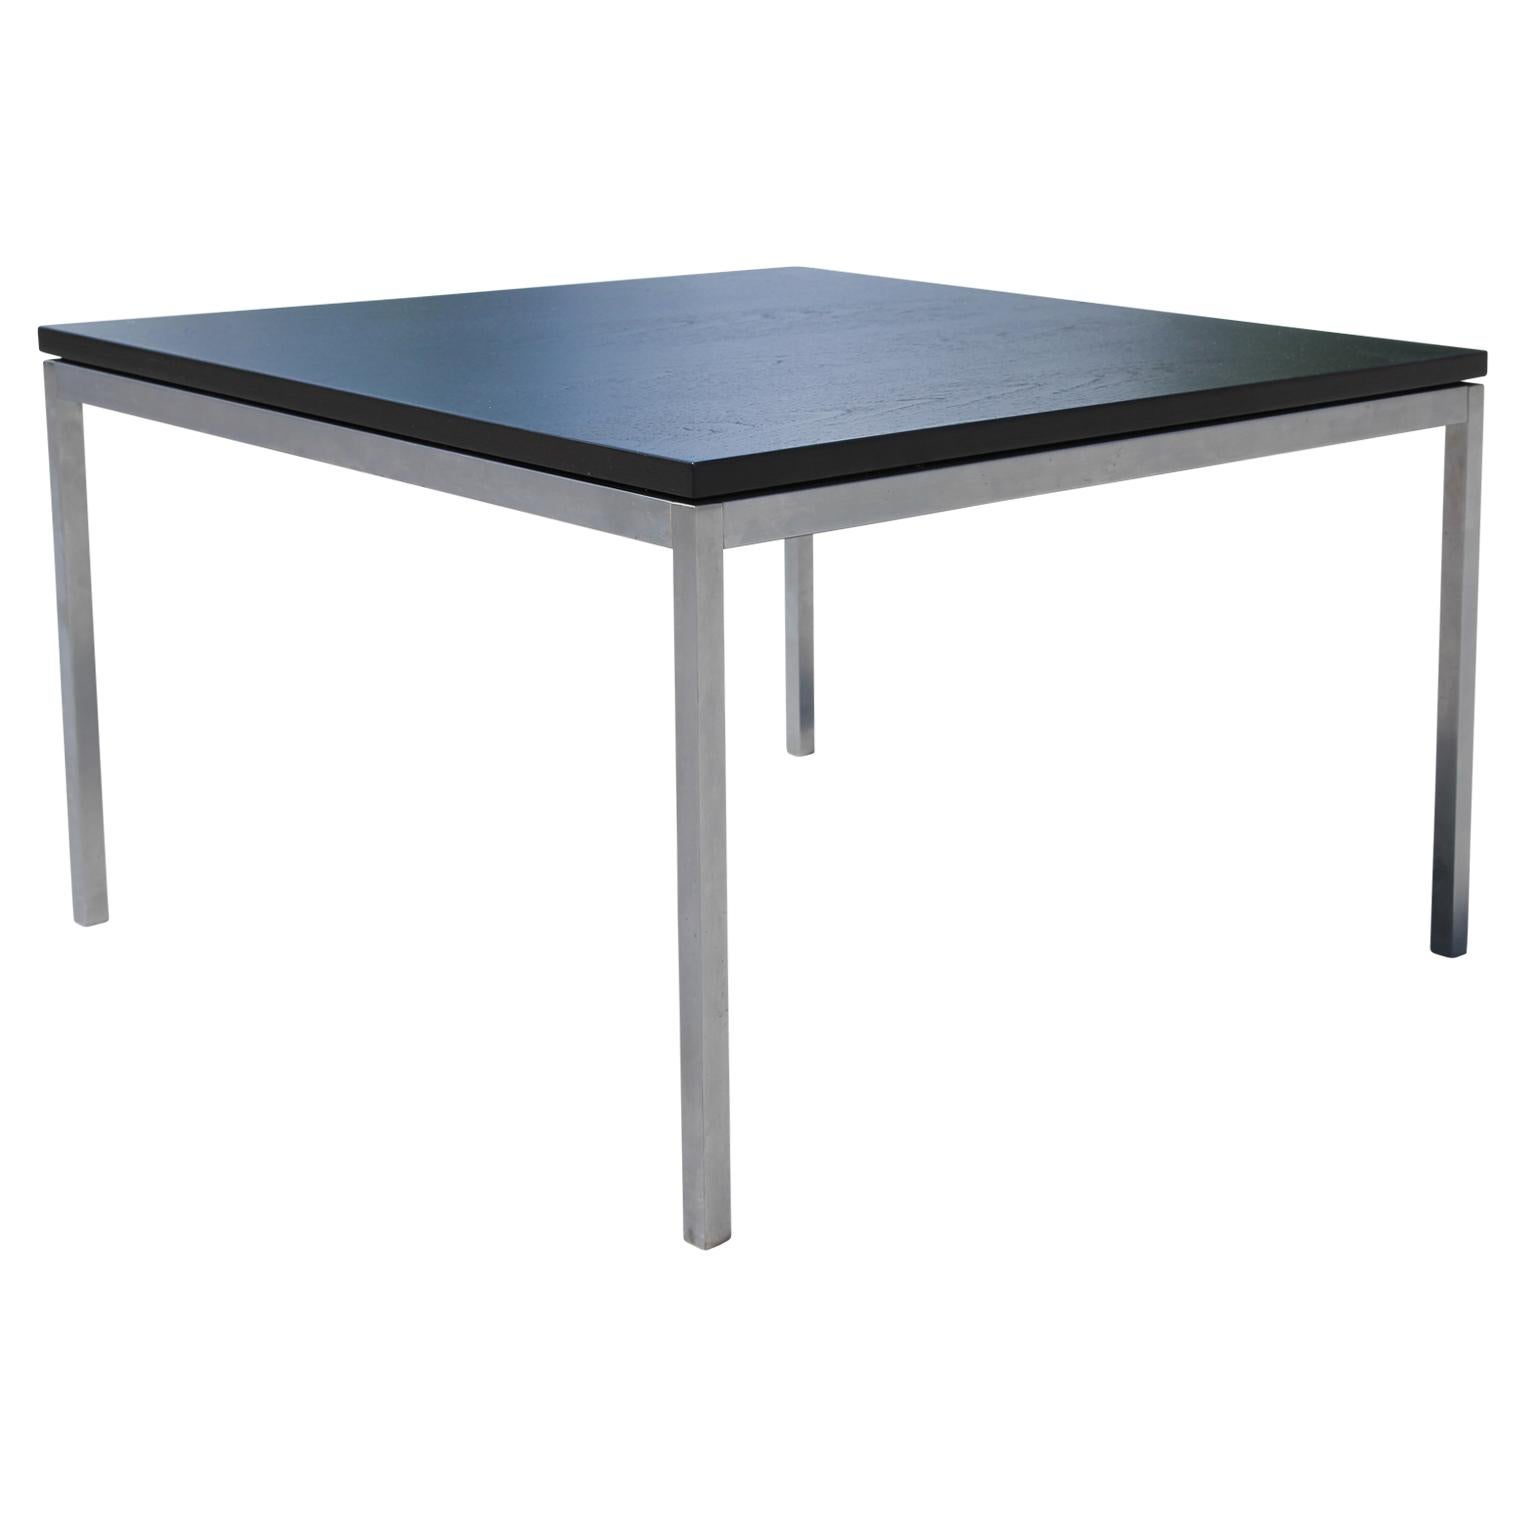 Beautifully black-stained oak table in the Mid-Century Modern style. There is a 